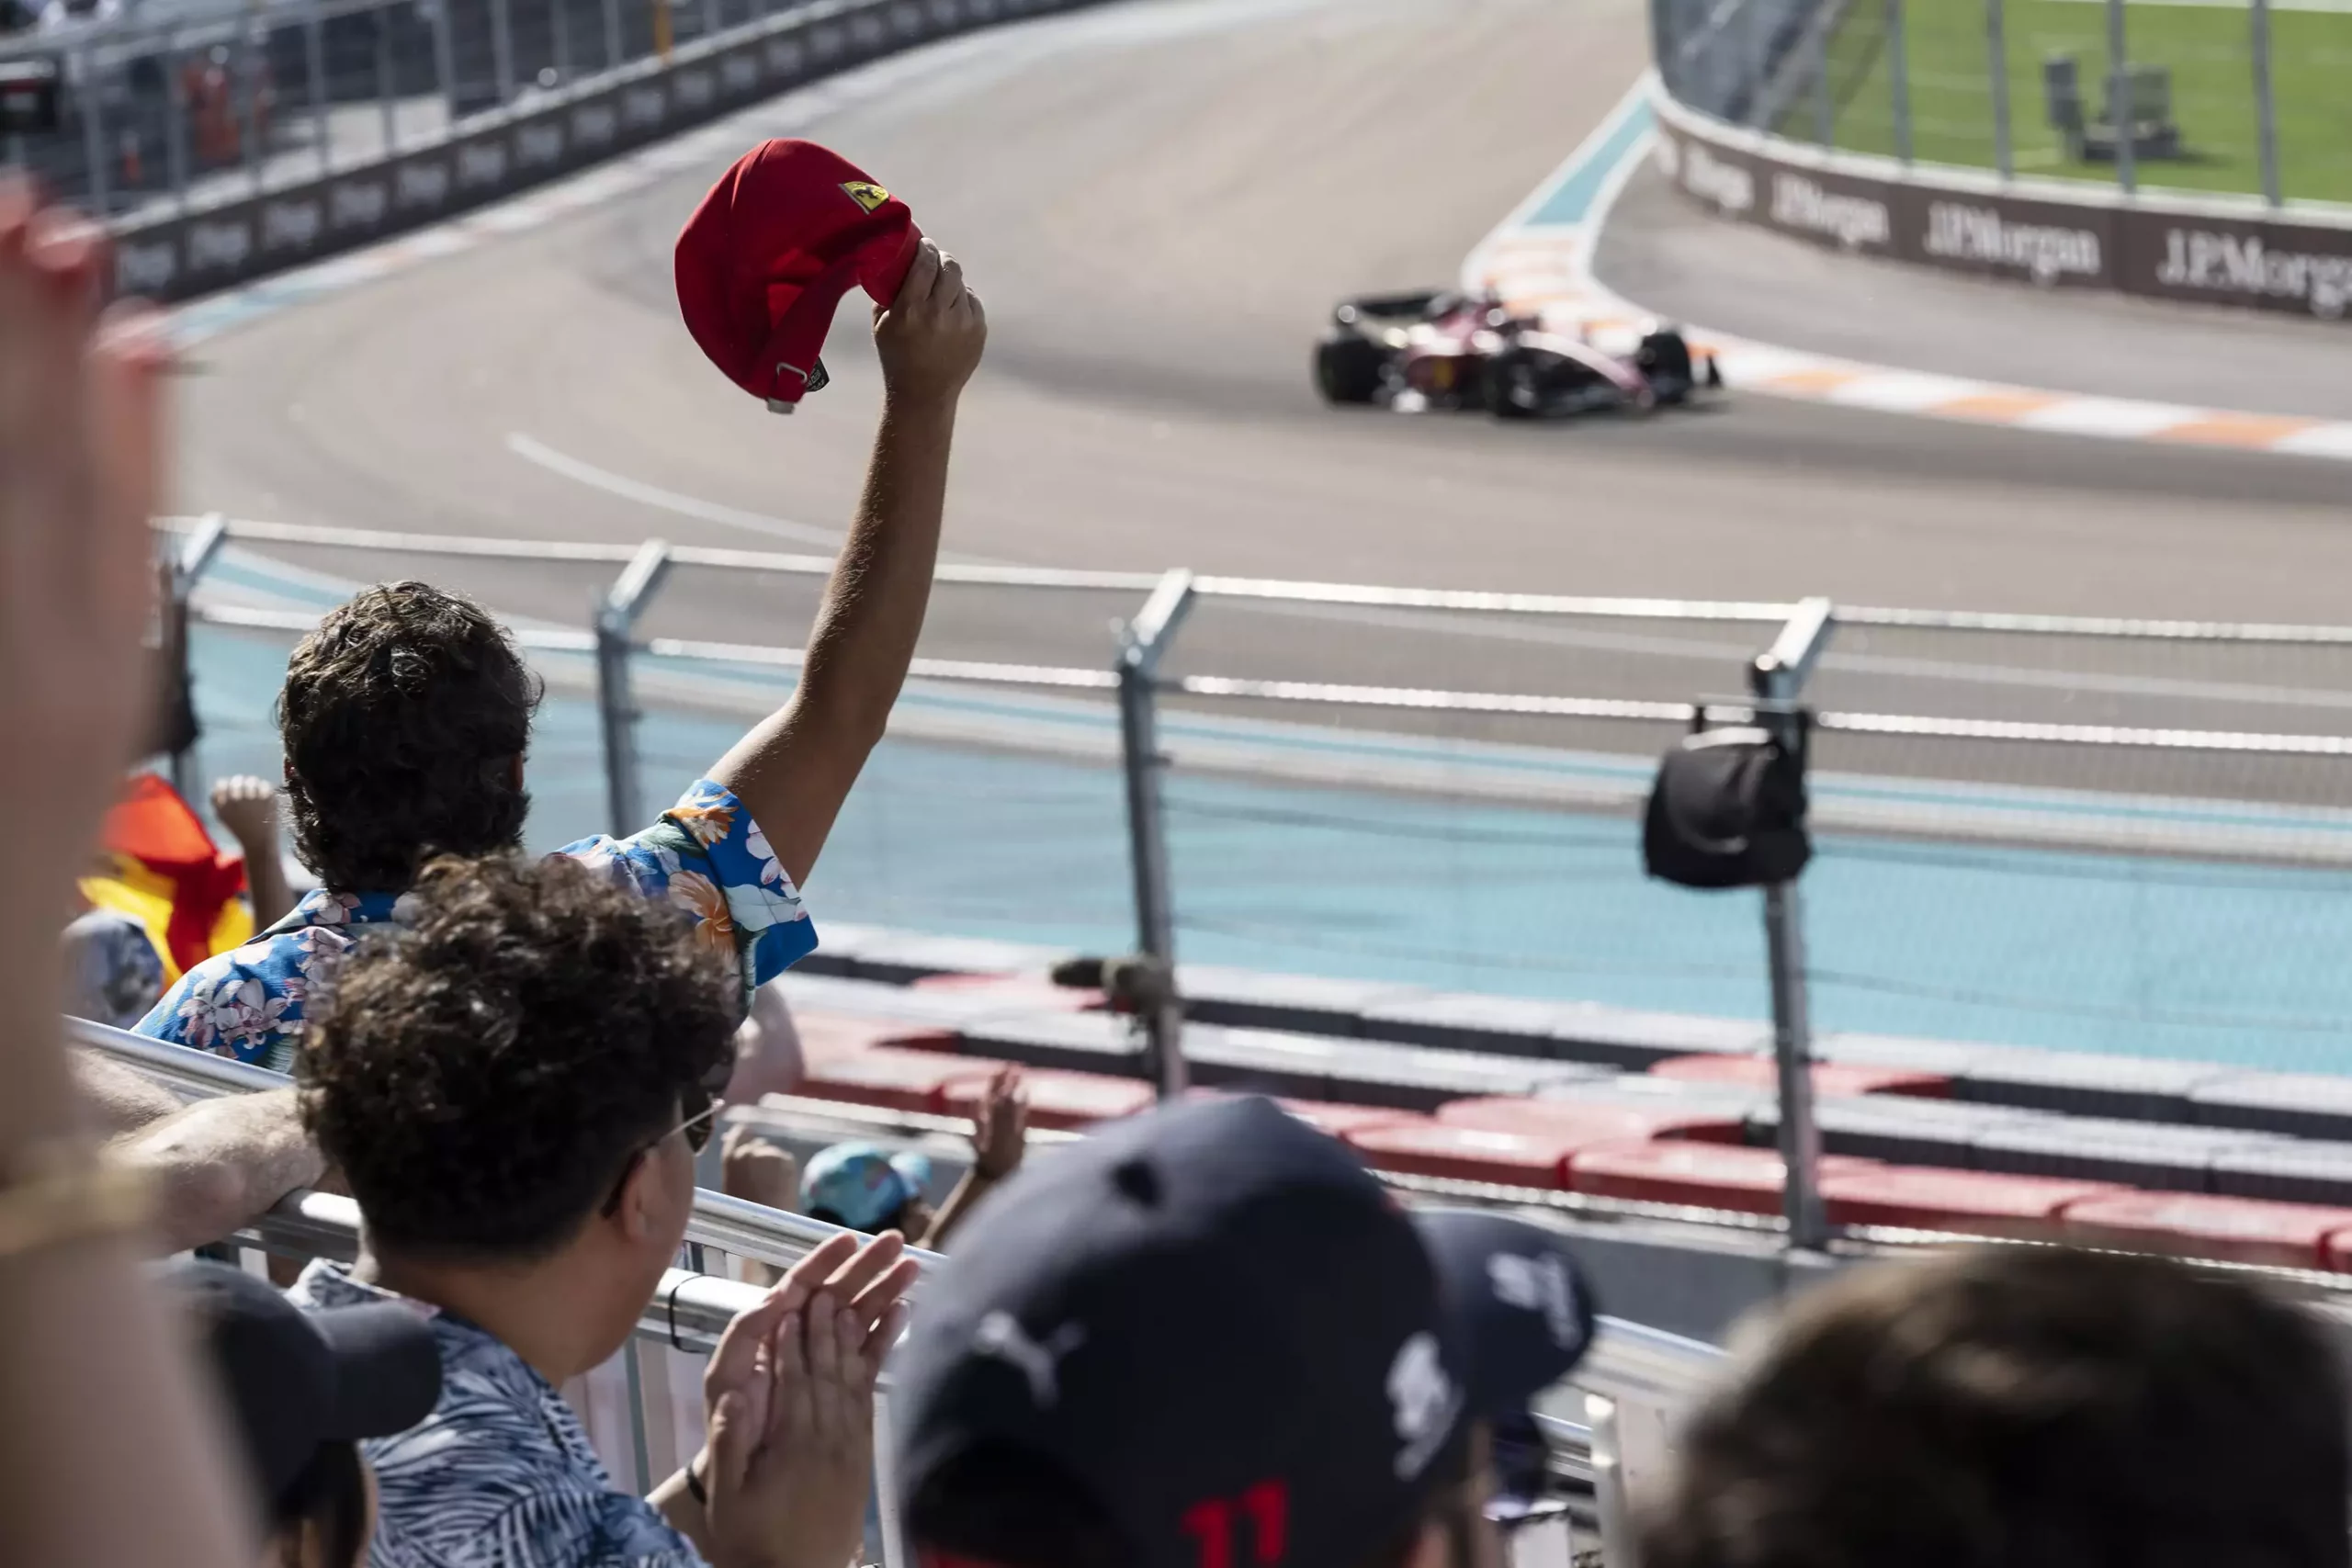 The Formula 1 Experience In Miami With IWC Watches - Worn & Wound